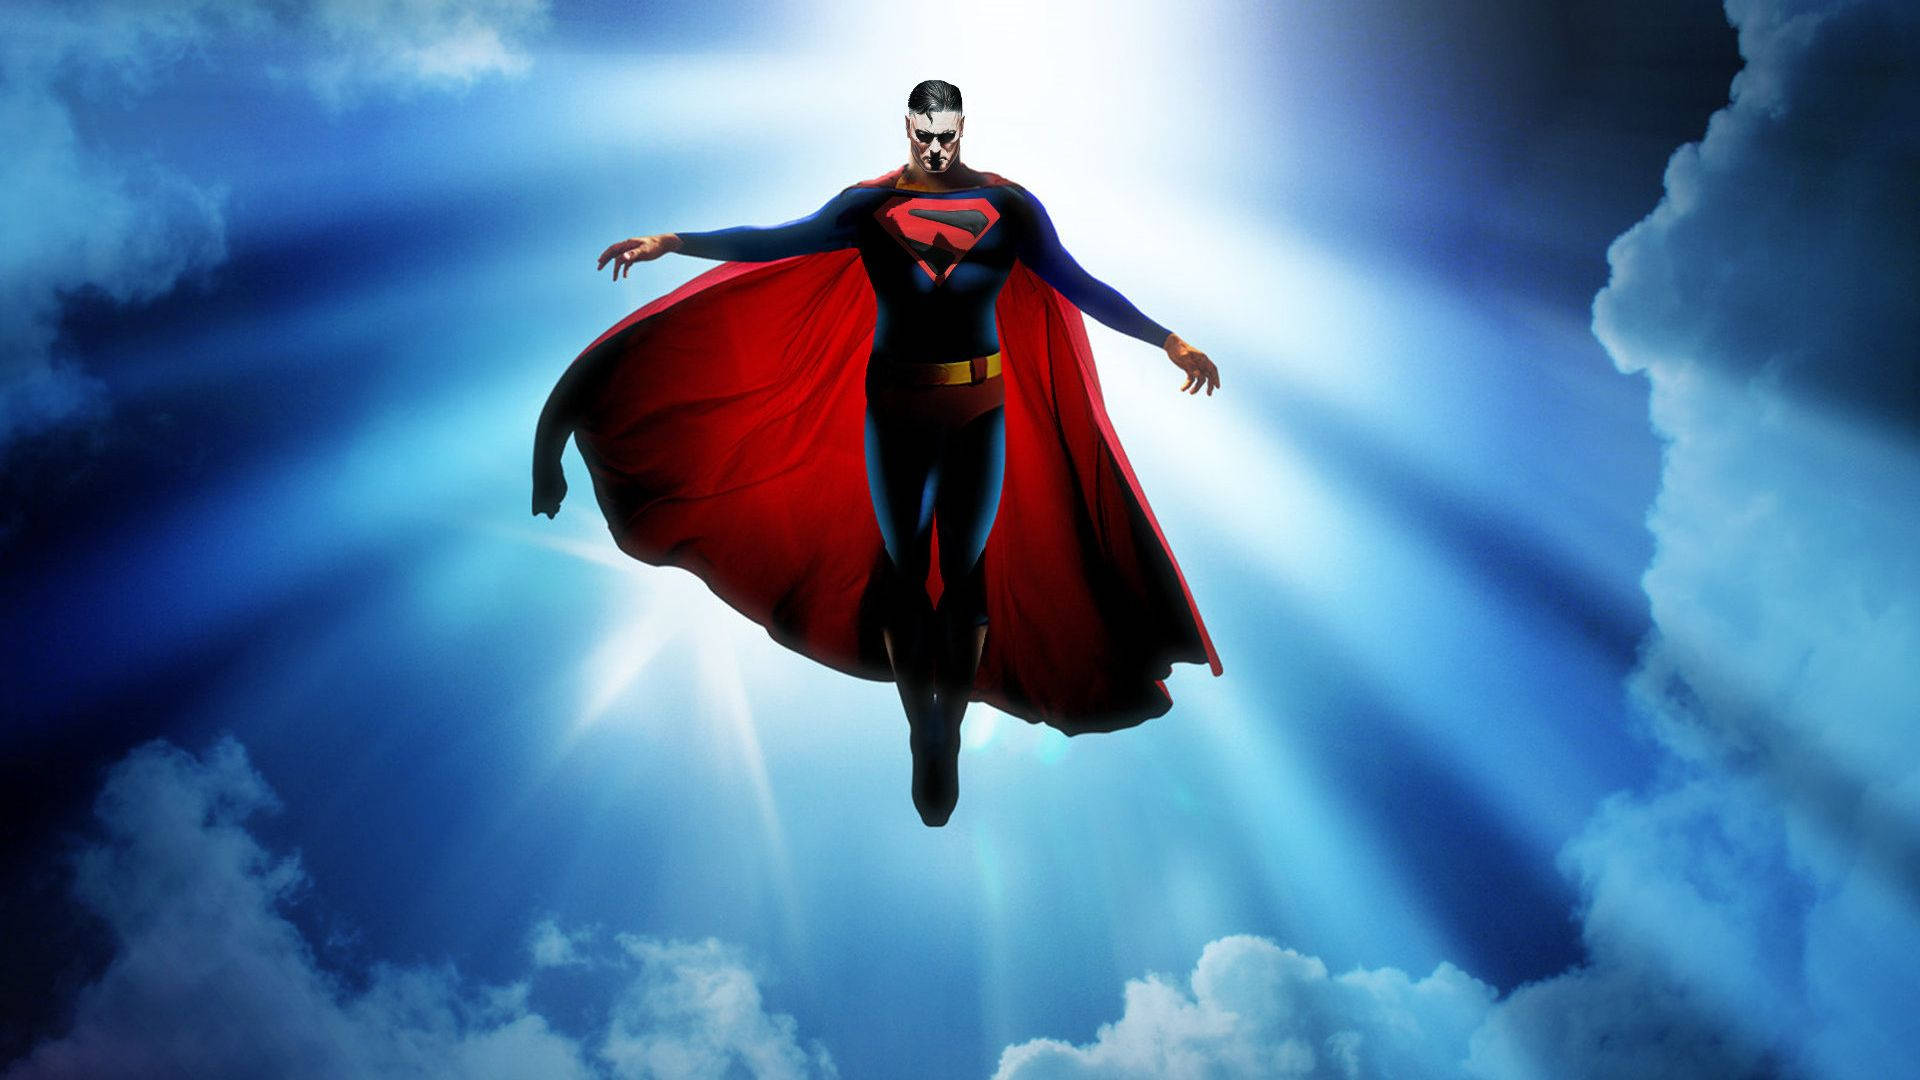 Superman Flying Through The Clouds Background